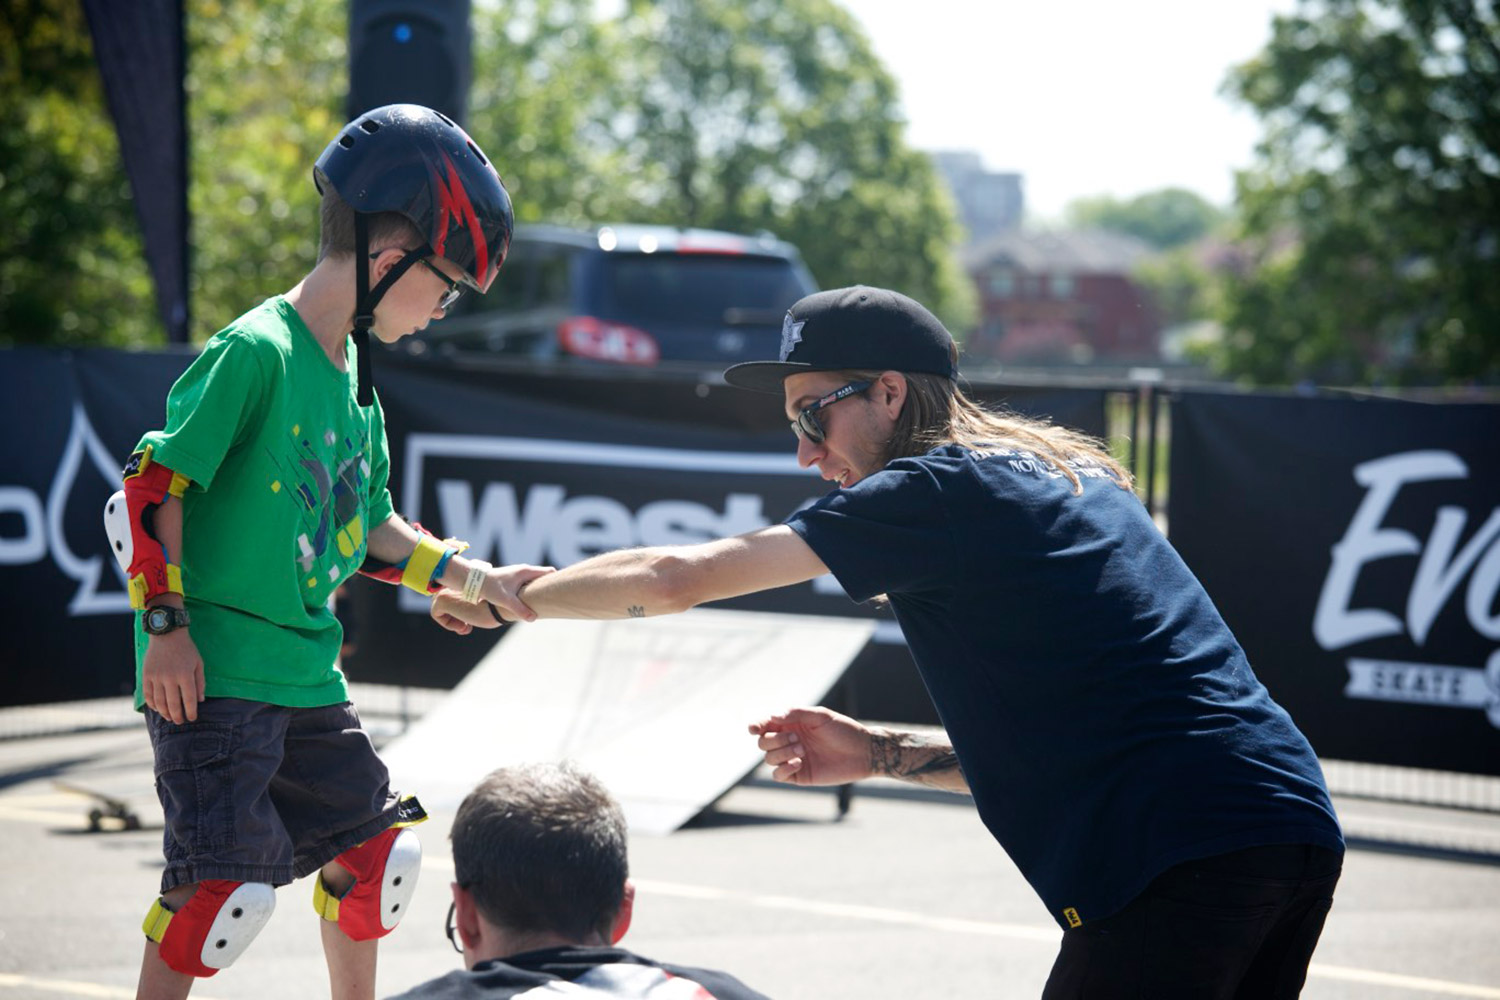 Why should my Child take Skateboard Lessons?